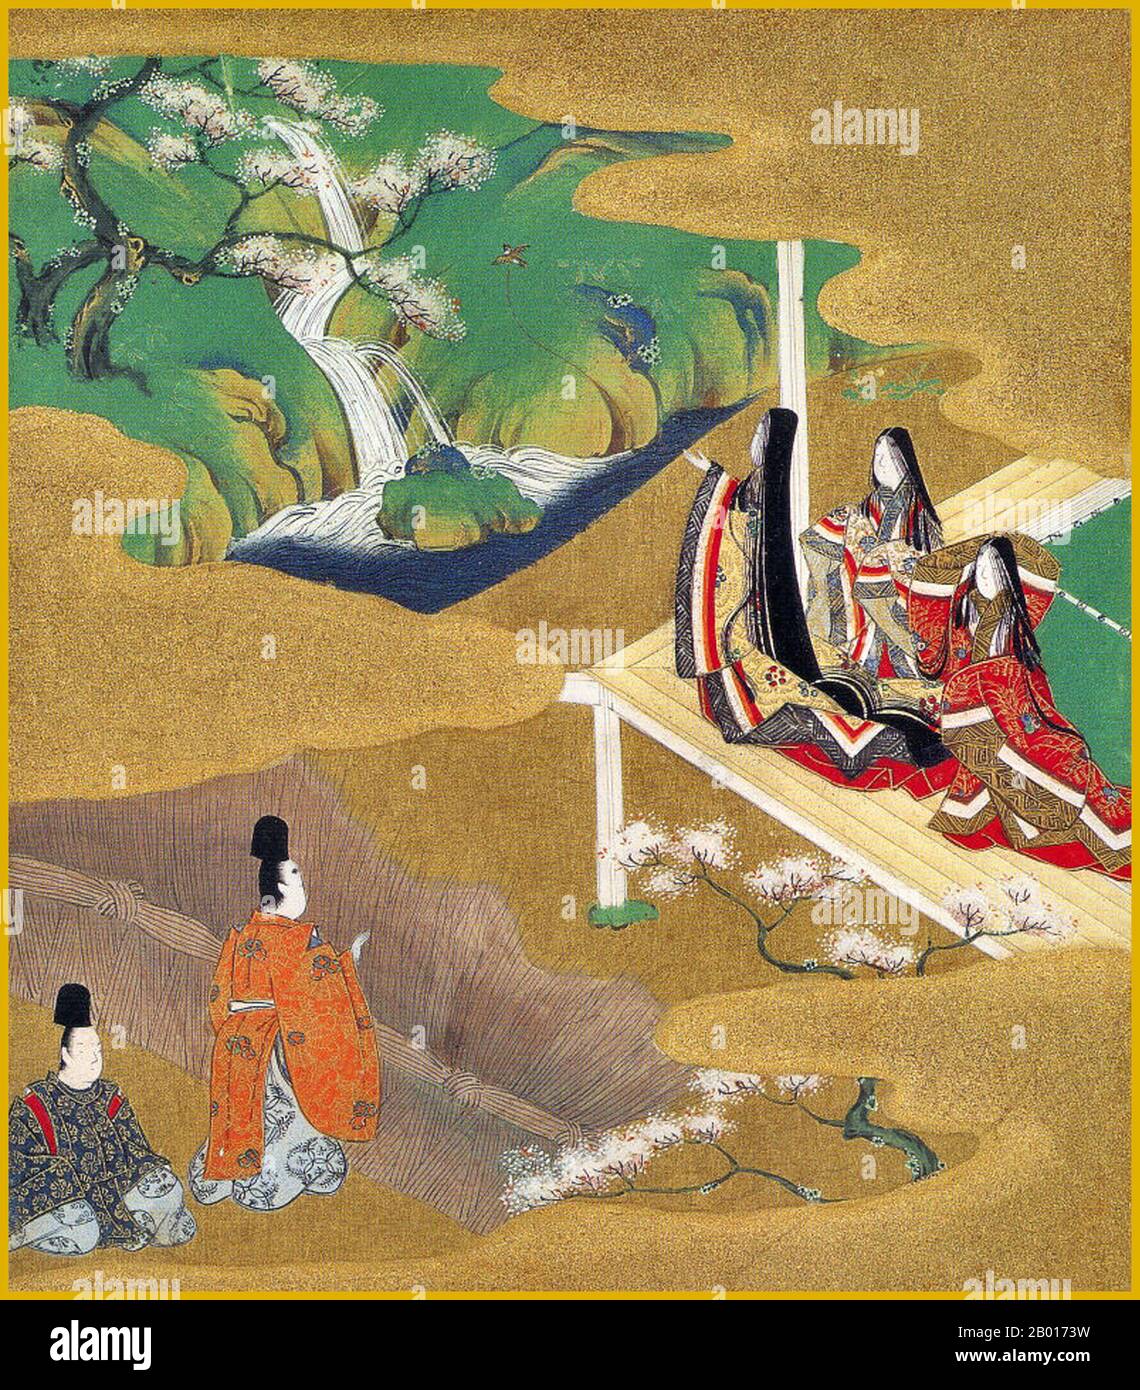 Japan: 'Chapter 5 - Wakamurasaki (Young Murasaki)'. Illustration from the Genji Monogatari ('Tale of Genji'), by Tosa Mitsuoki (21 November 1617 – 14 November 1691), late 17th century.  'The Tale of Genji' is a work of classical Japanese literature from the early 11th century by lady-in-waiting Murasaki Shikibu. The tale recounts the life of Hikaru Genji, the son of the Japanese emperor, and depicts the lifestyles of high courtiers during the Heian period. It is considered by some as the world's first novel, and was written in an archaic and poetic style that is now almost unreadable. Stock Photo